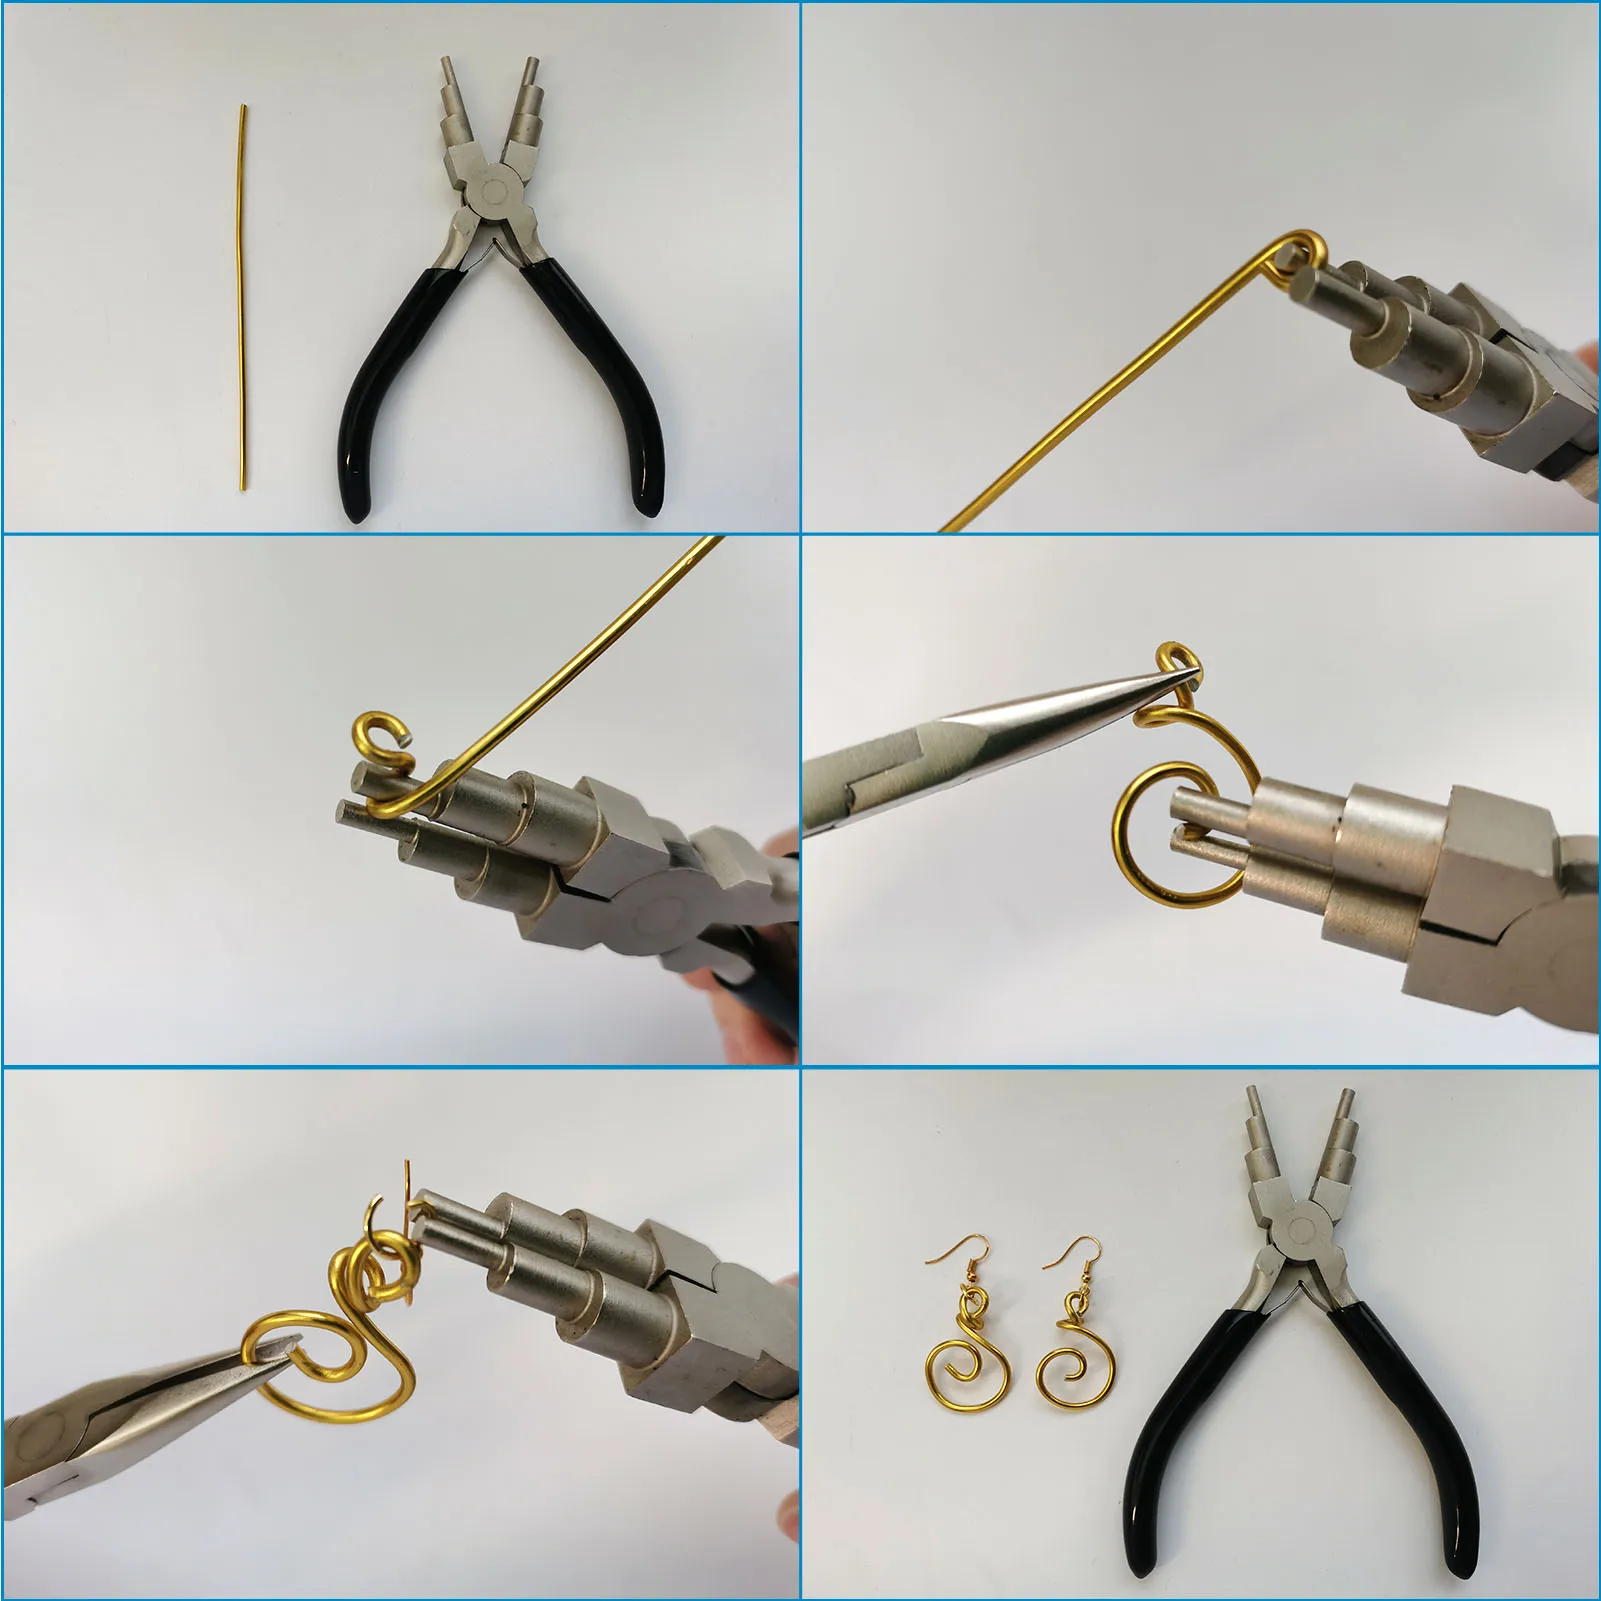 6-in-1 Bail Making Pliers 45# Carbon Steel 6-Step Multi-Size Wire Looping Forming Pliers Loop Size: 3mm/4mm/6mm/7mm/8.5mm/9.5mm images - 6